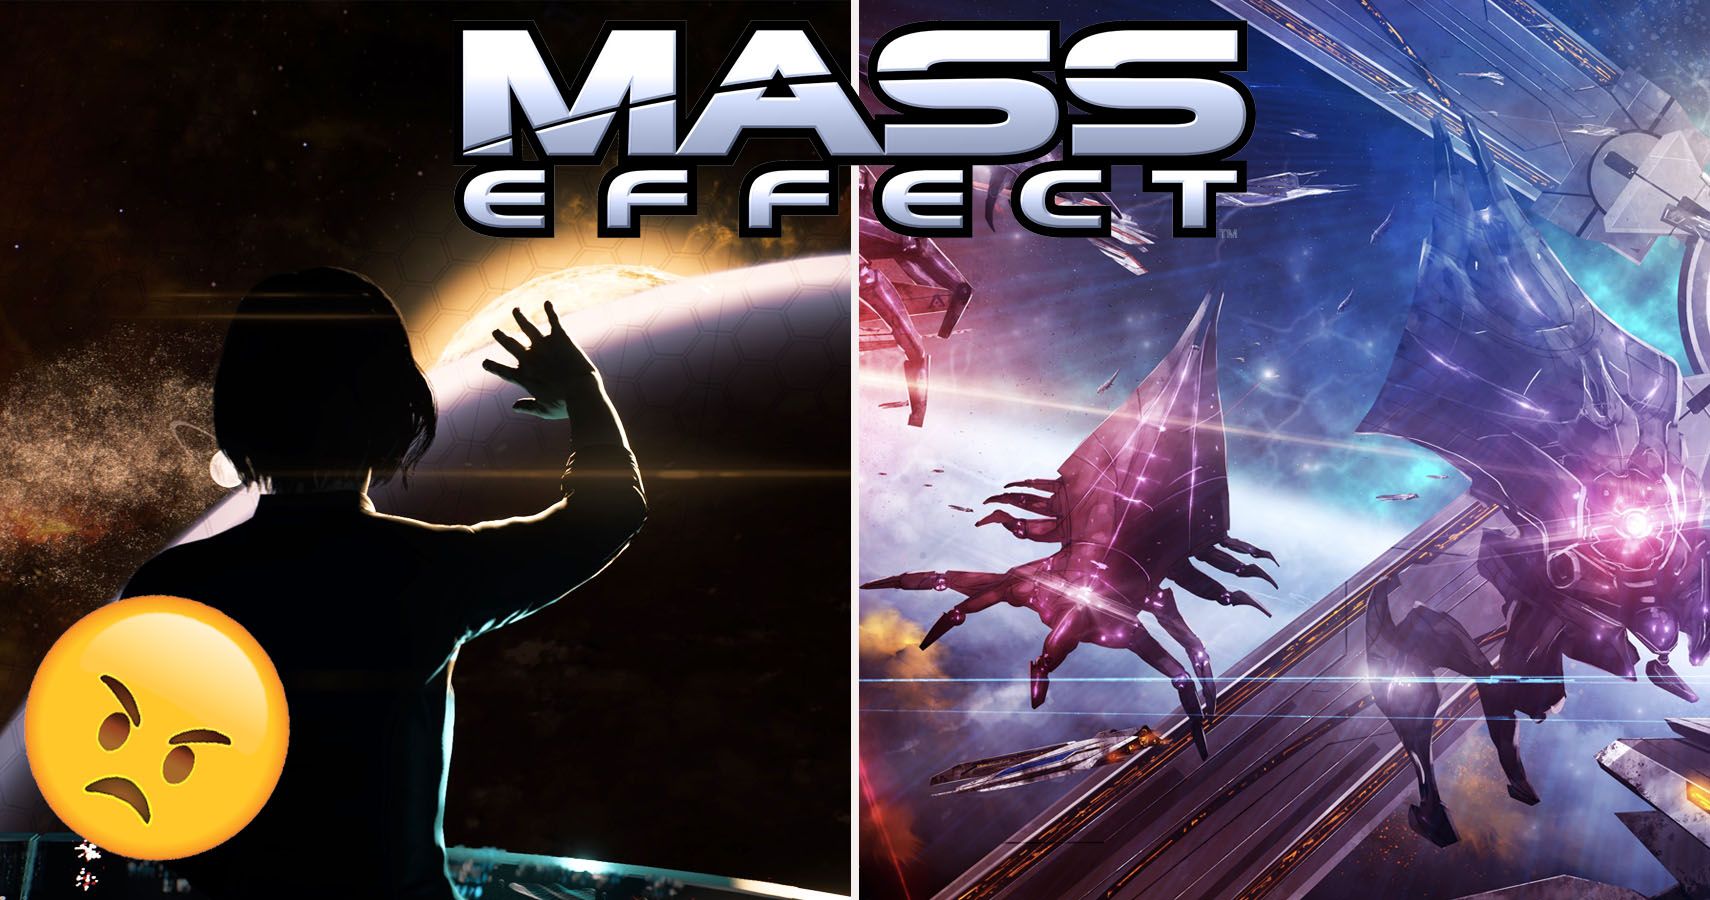 15 Facts Mass Effect Gets Wrong About Space